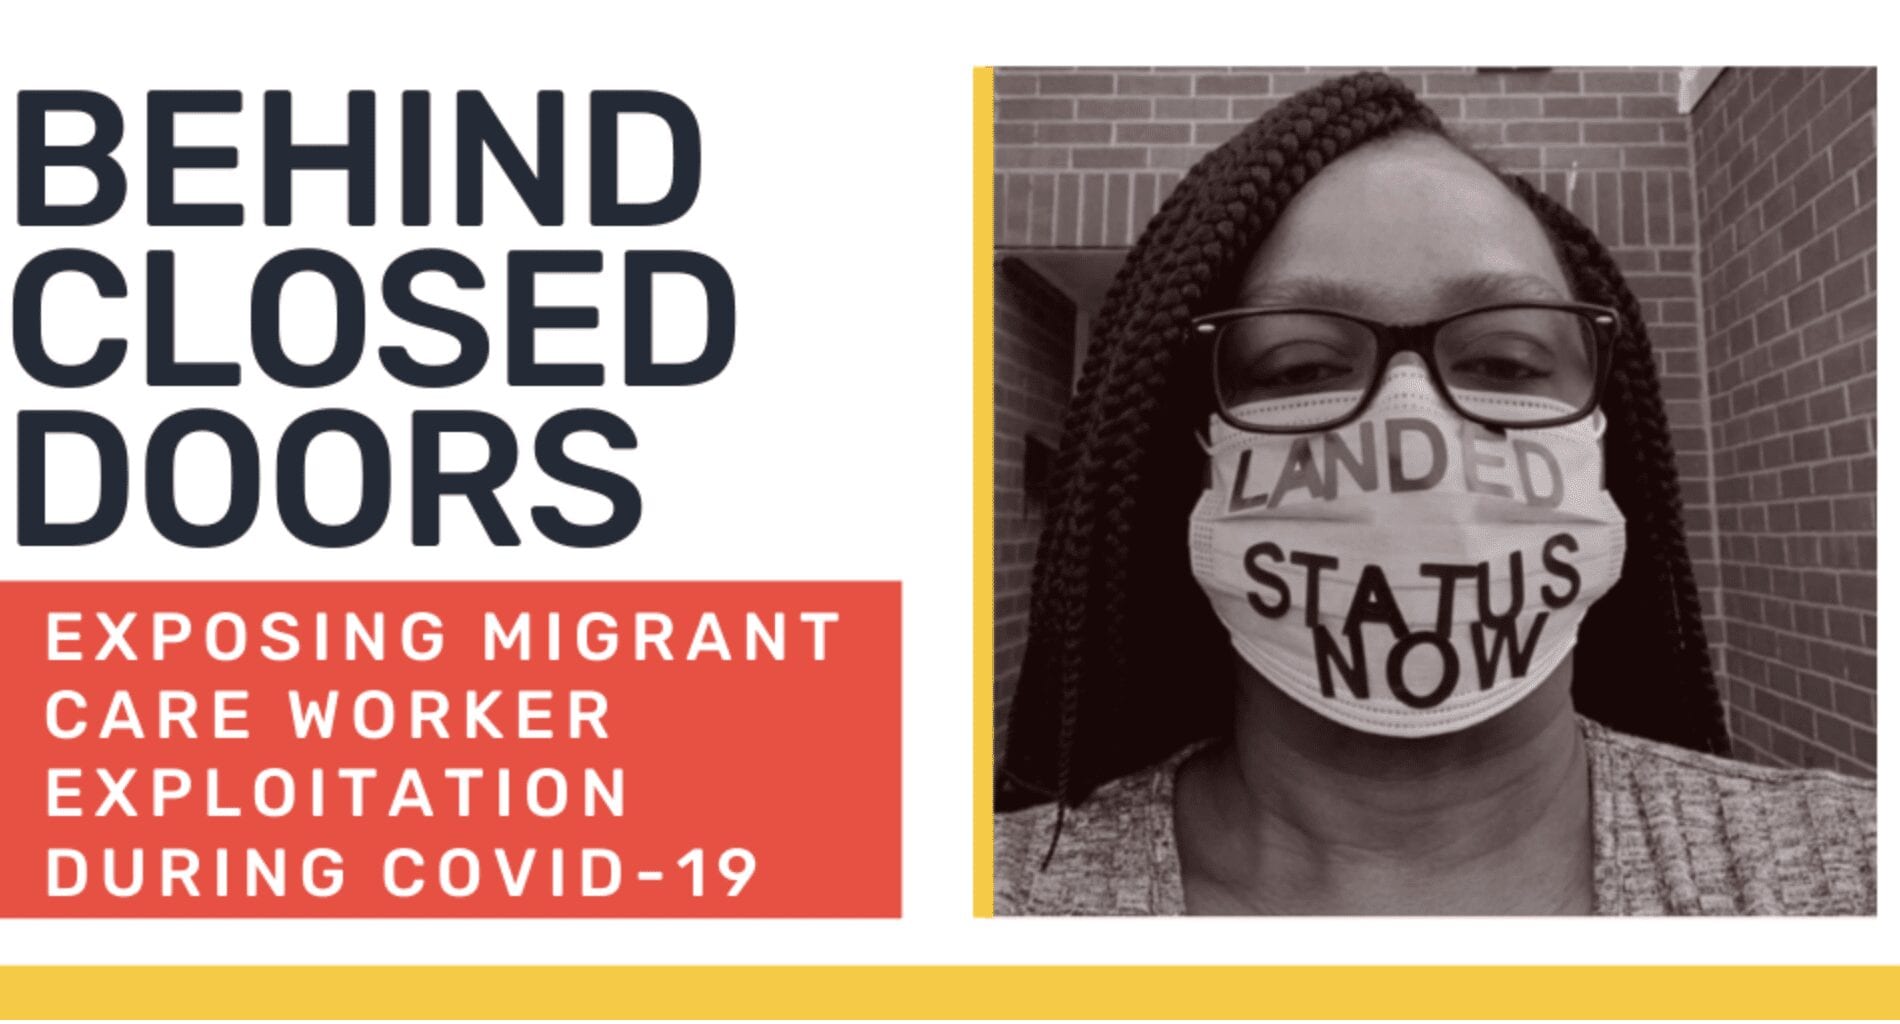 Behind Closed Doors: Exposing Migrant Care Worker Exploitation During Covid-19